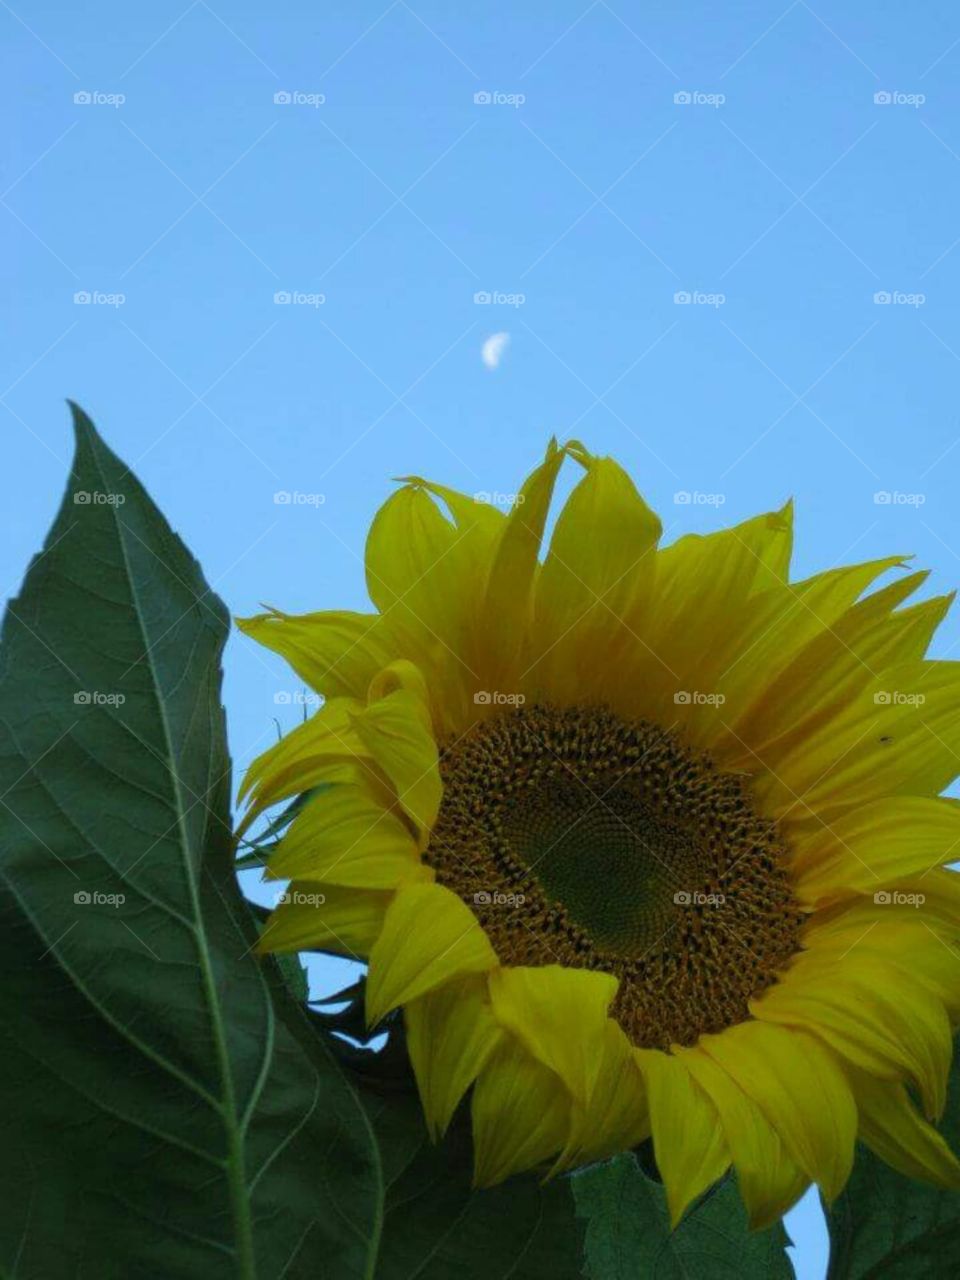 Sunflower with daytime moon crescent in the background sky.